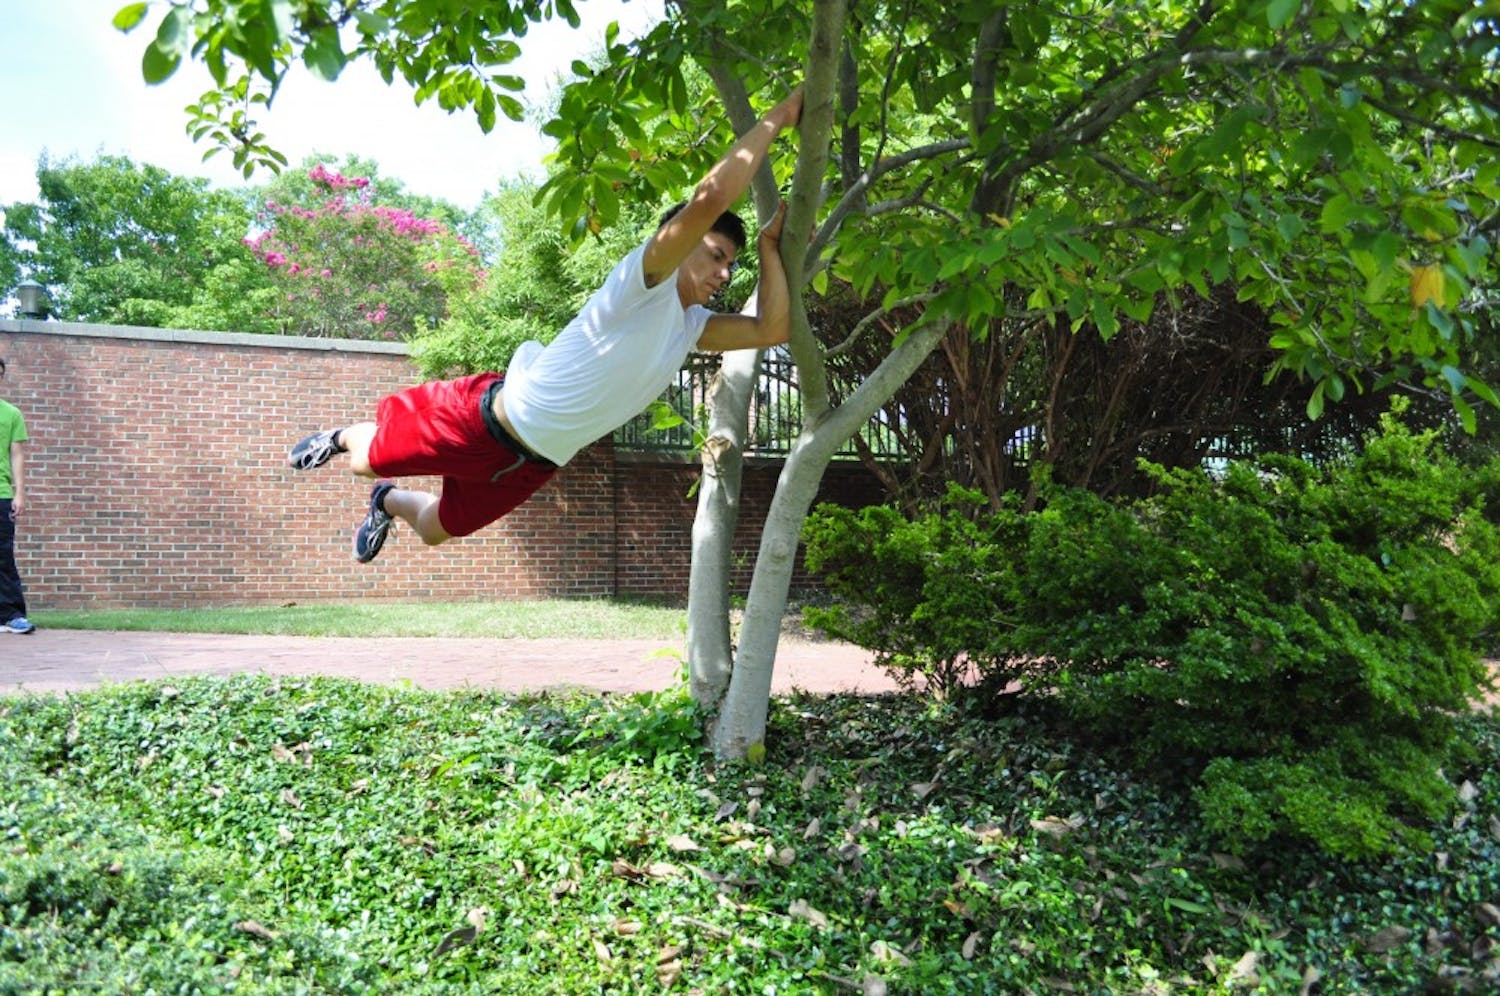 	Will Long doing a laches (pronounced lashay) off of a tree branch